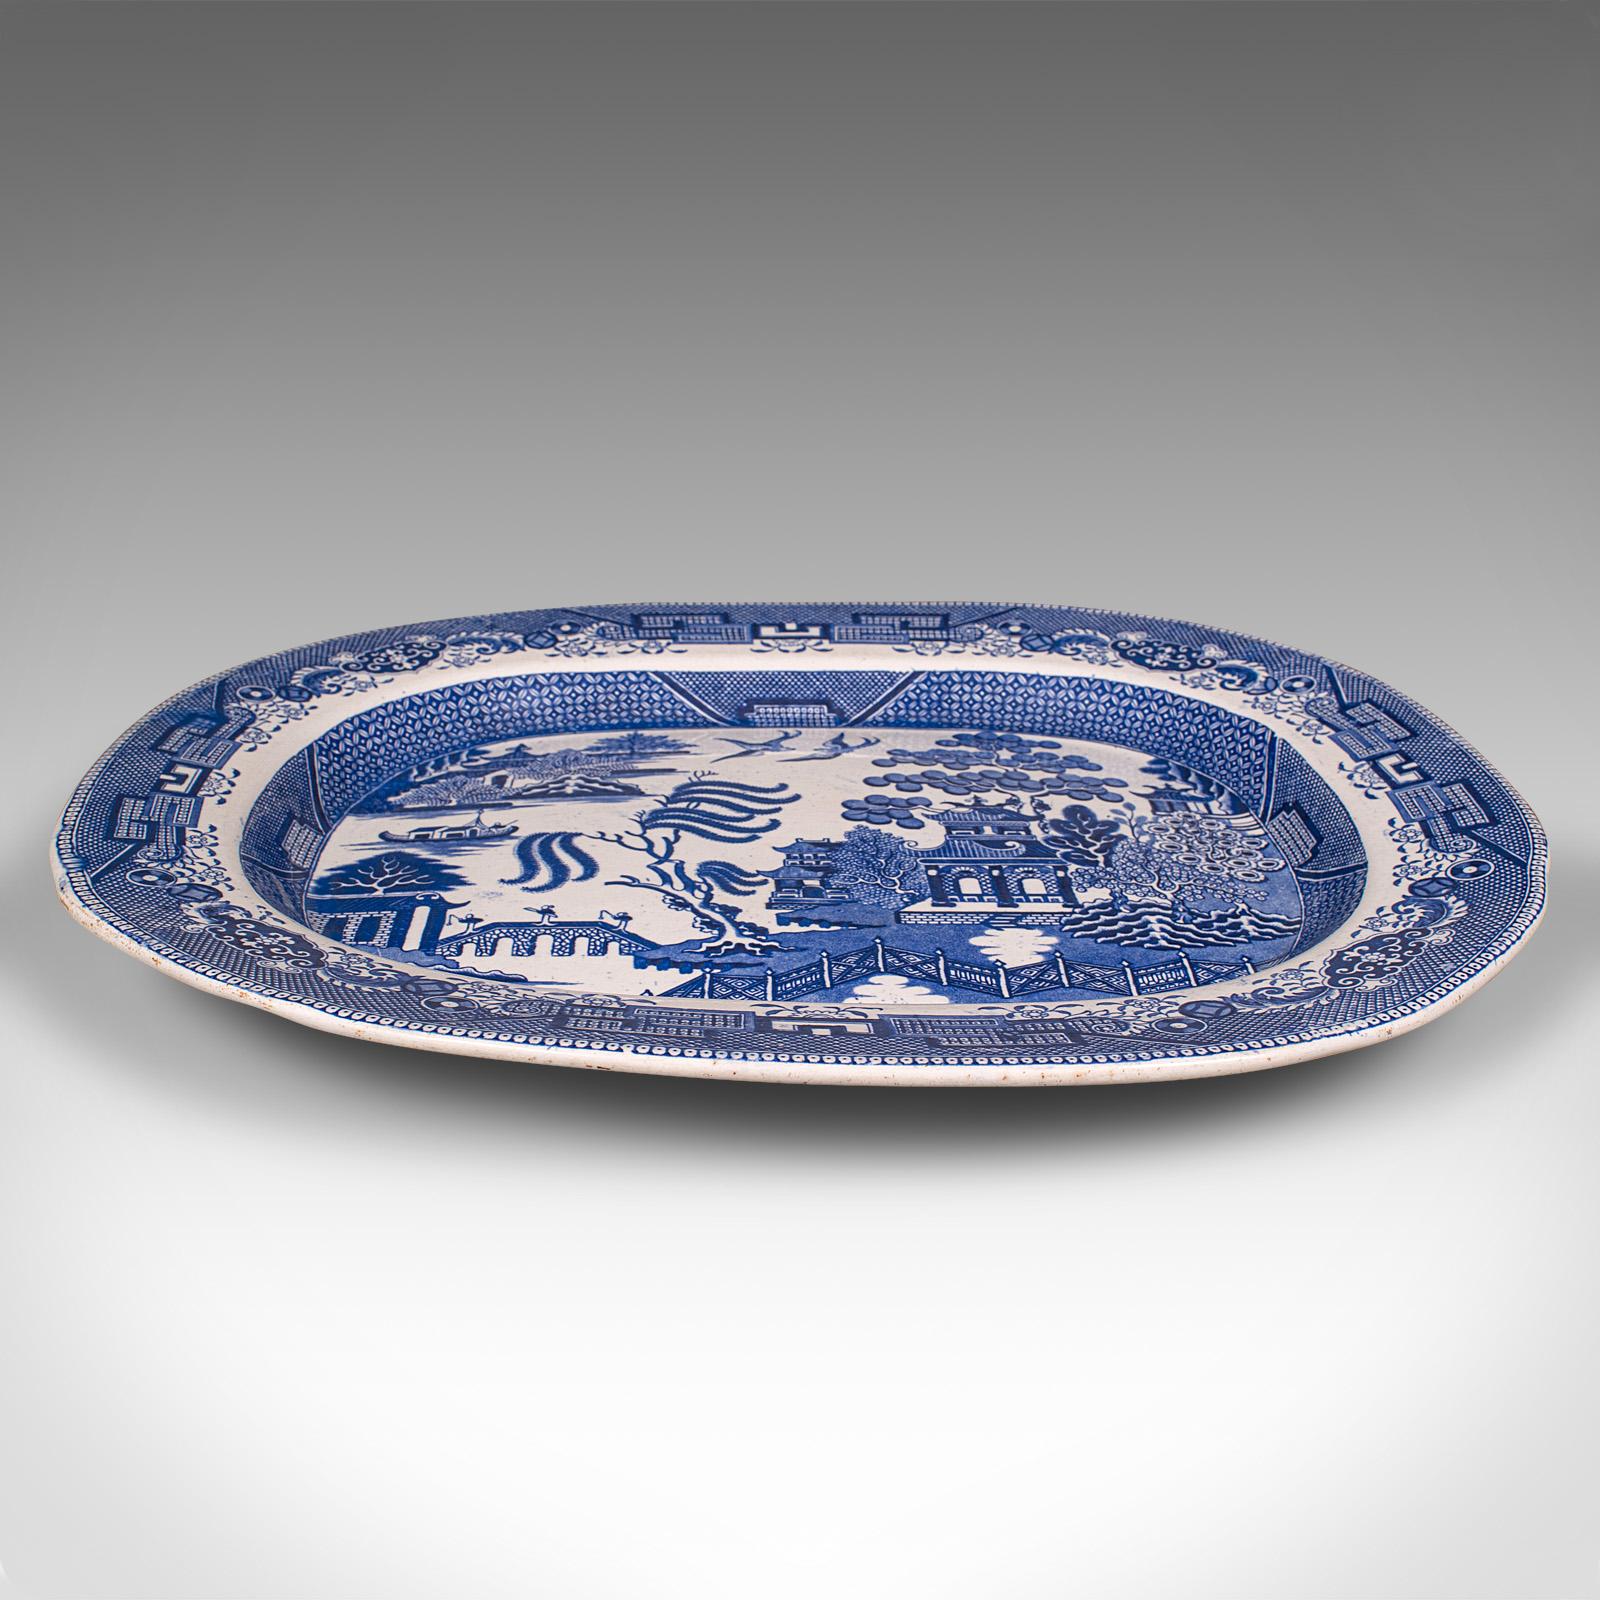 This is an antique Willow Pattern serving plate. An English, ceramic decorative meat dish, dating to the Victorian period, circa 1850.

Accentuated with the enduring appeal of the classic Willow Pattern decor
Displays a desirable aged patina and in